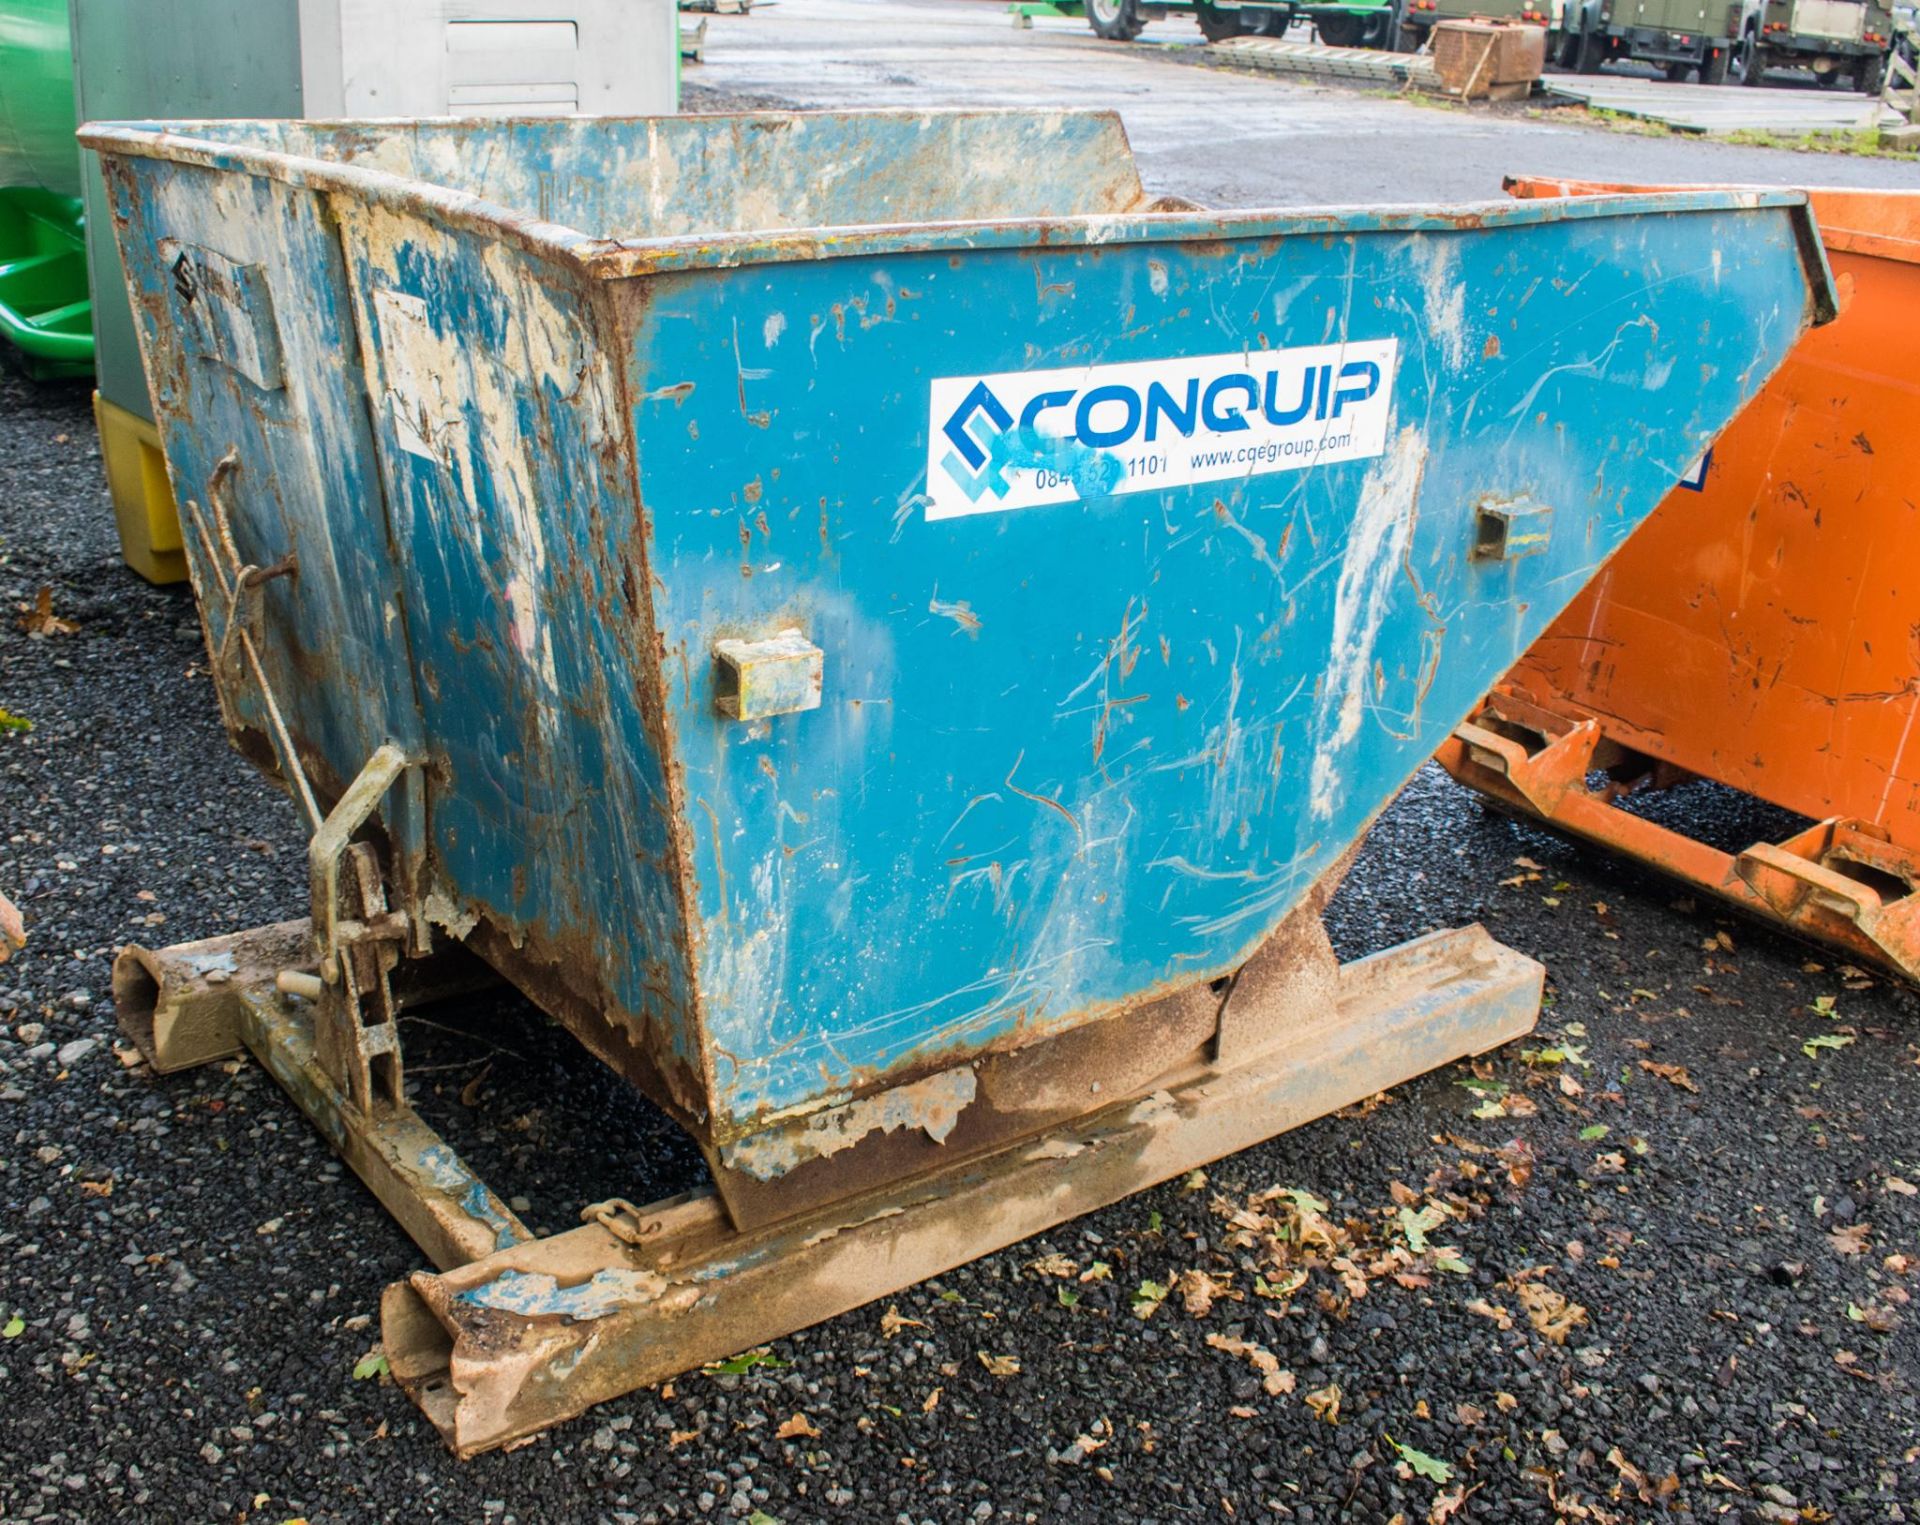 Conquip fork lift tipping skip - Image 2 of 3